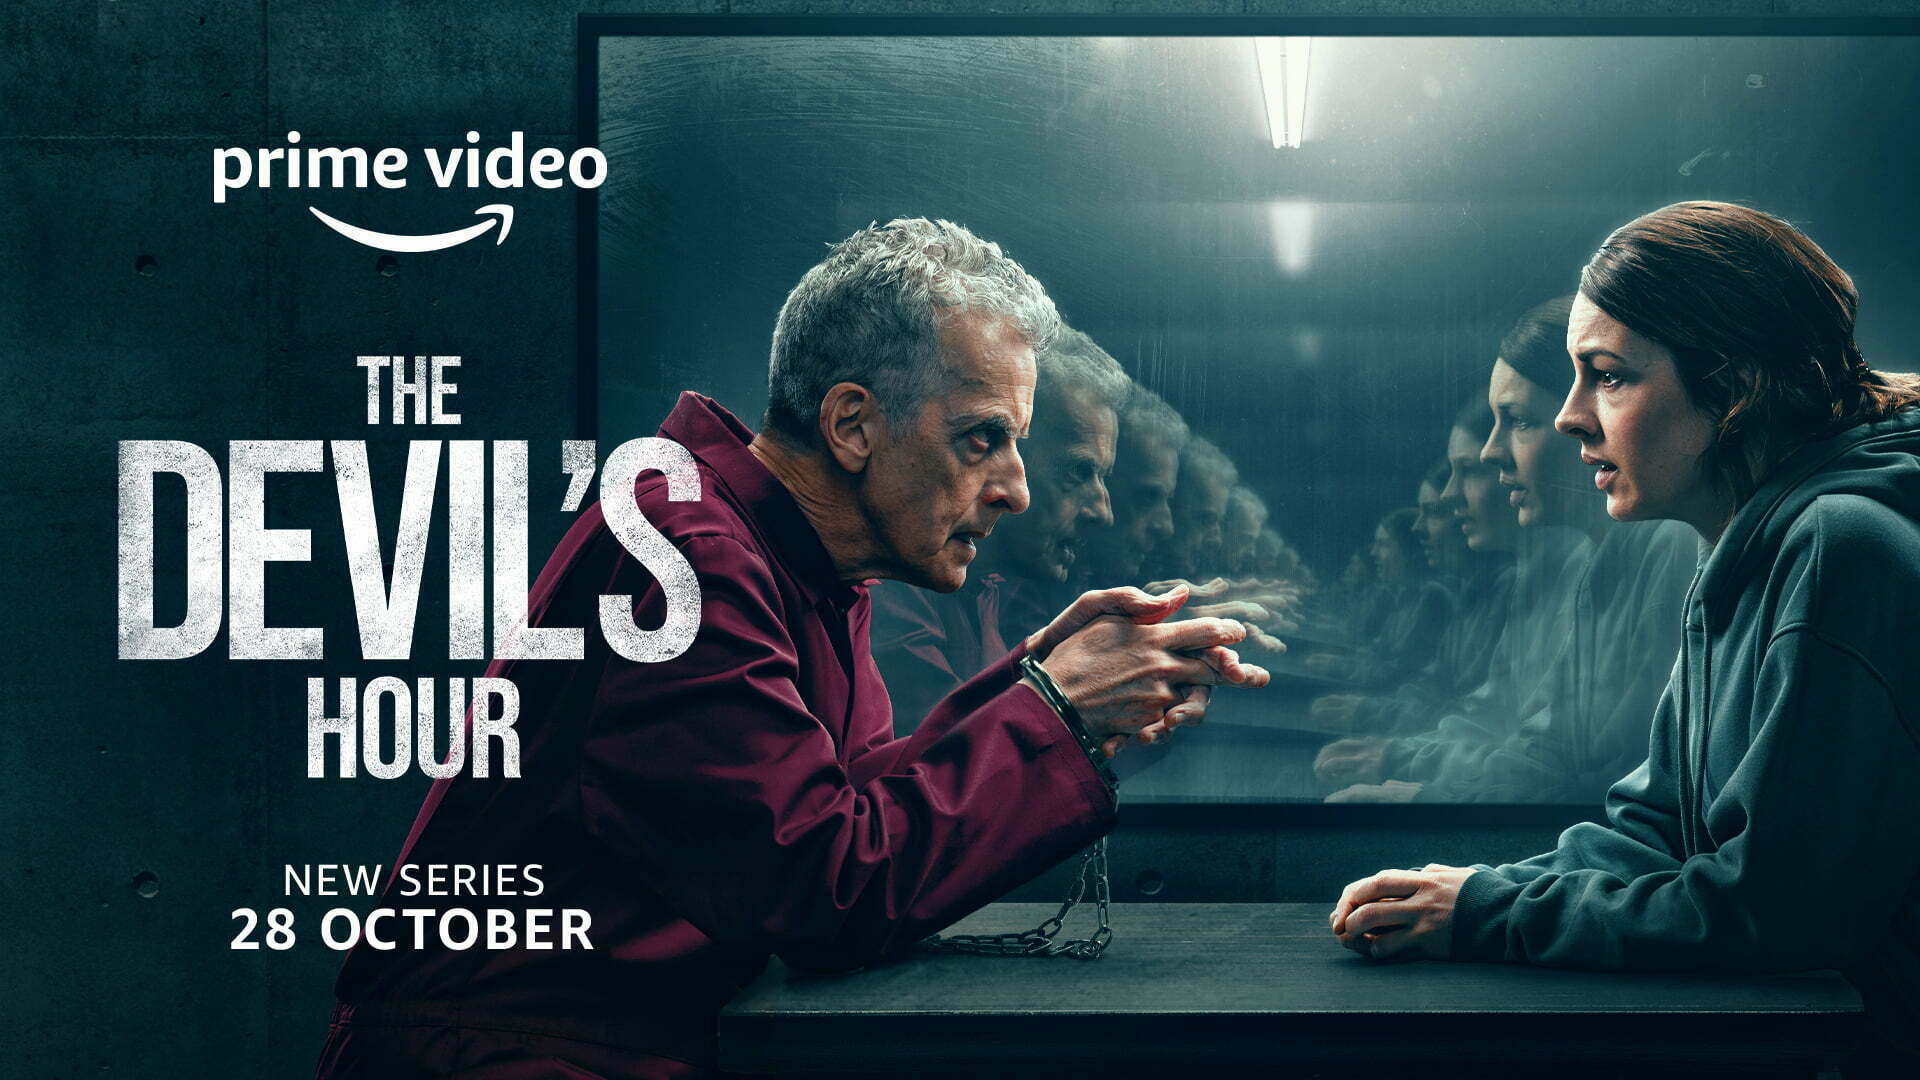 The Devil's hour poster